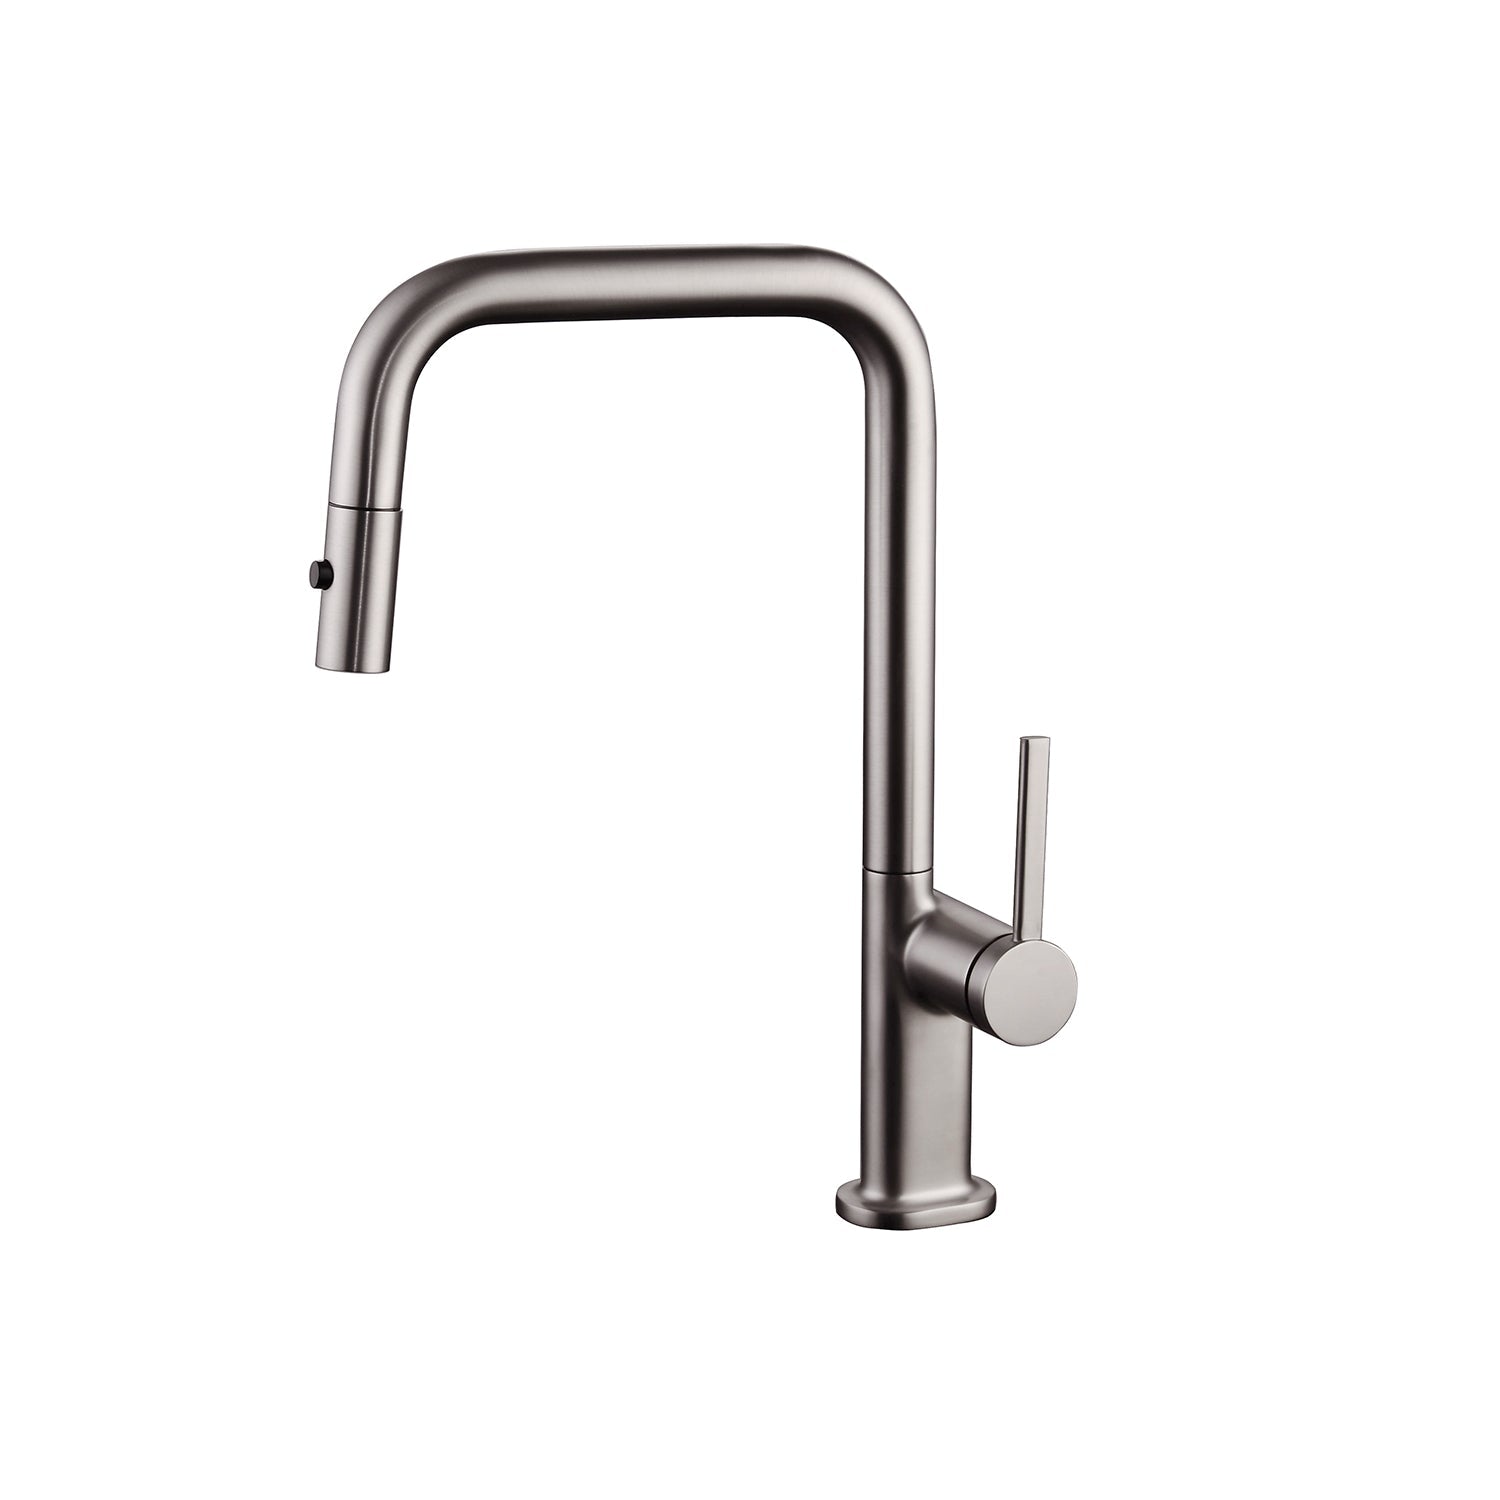 DAX Single Handle Pull Out Kitchen Faucet (DAX-8020007)